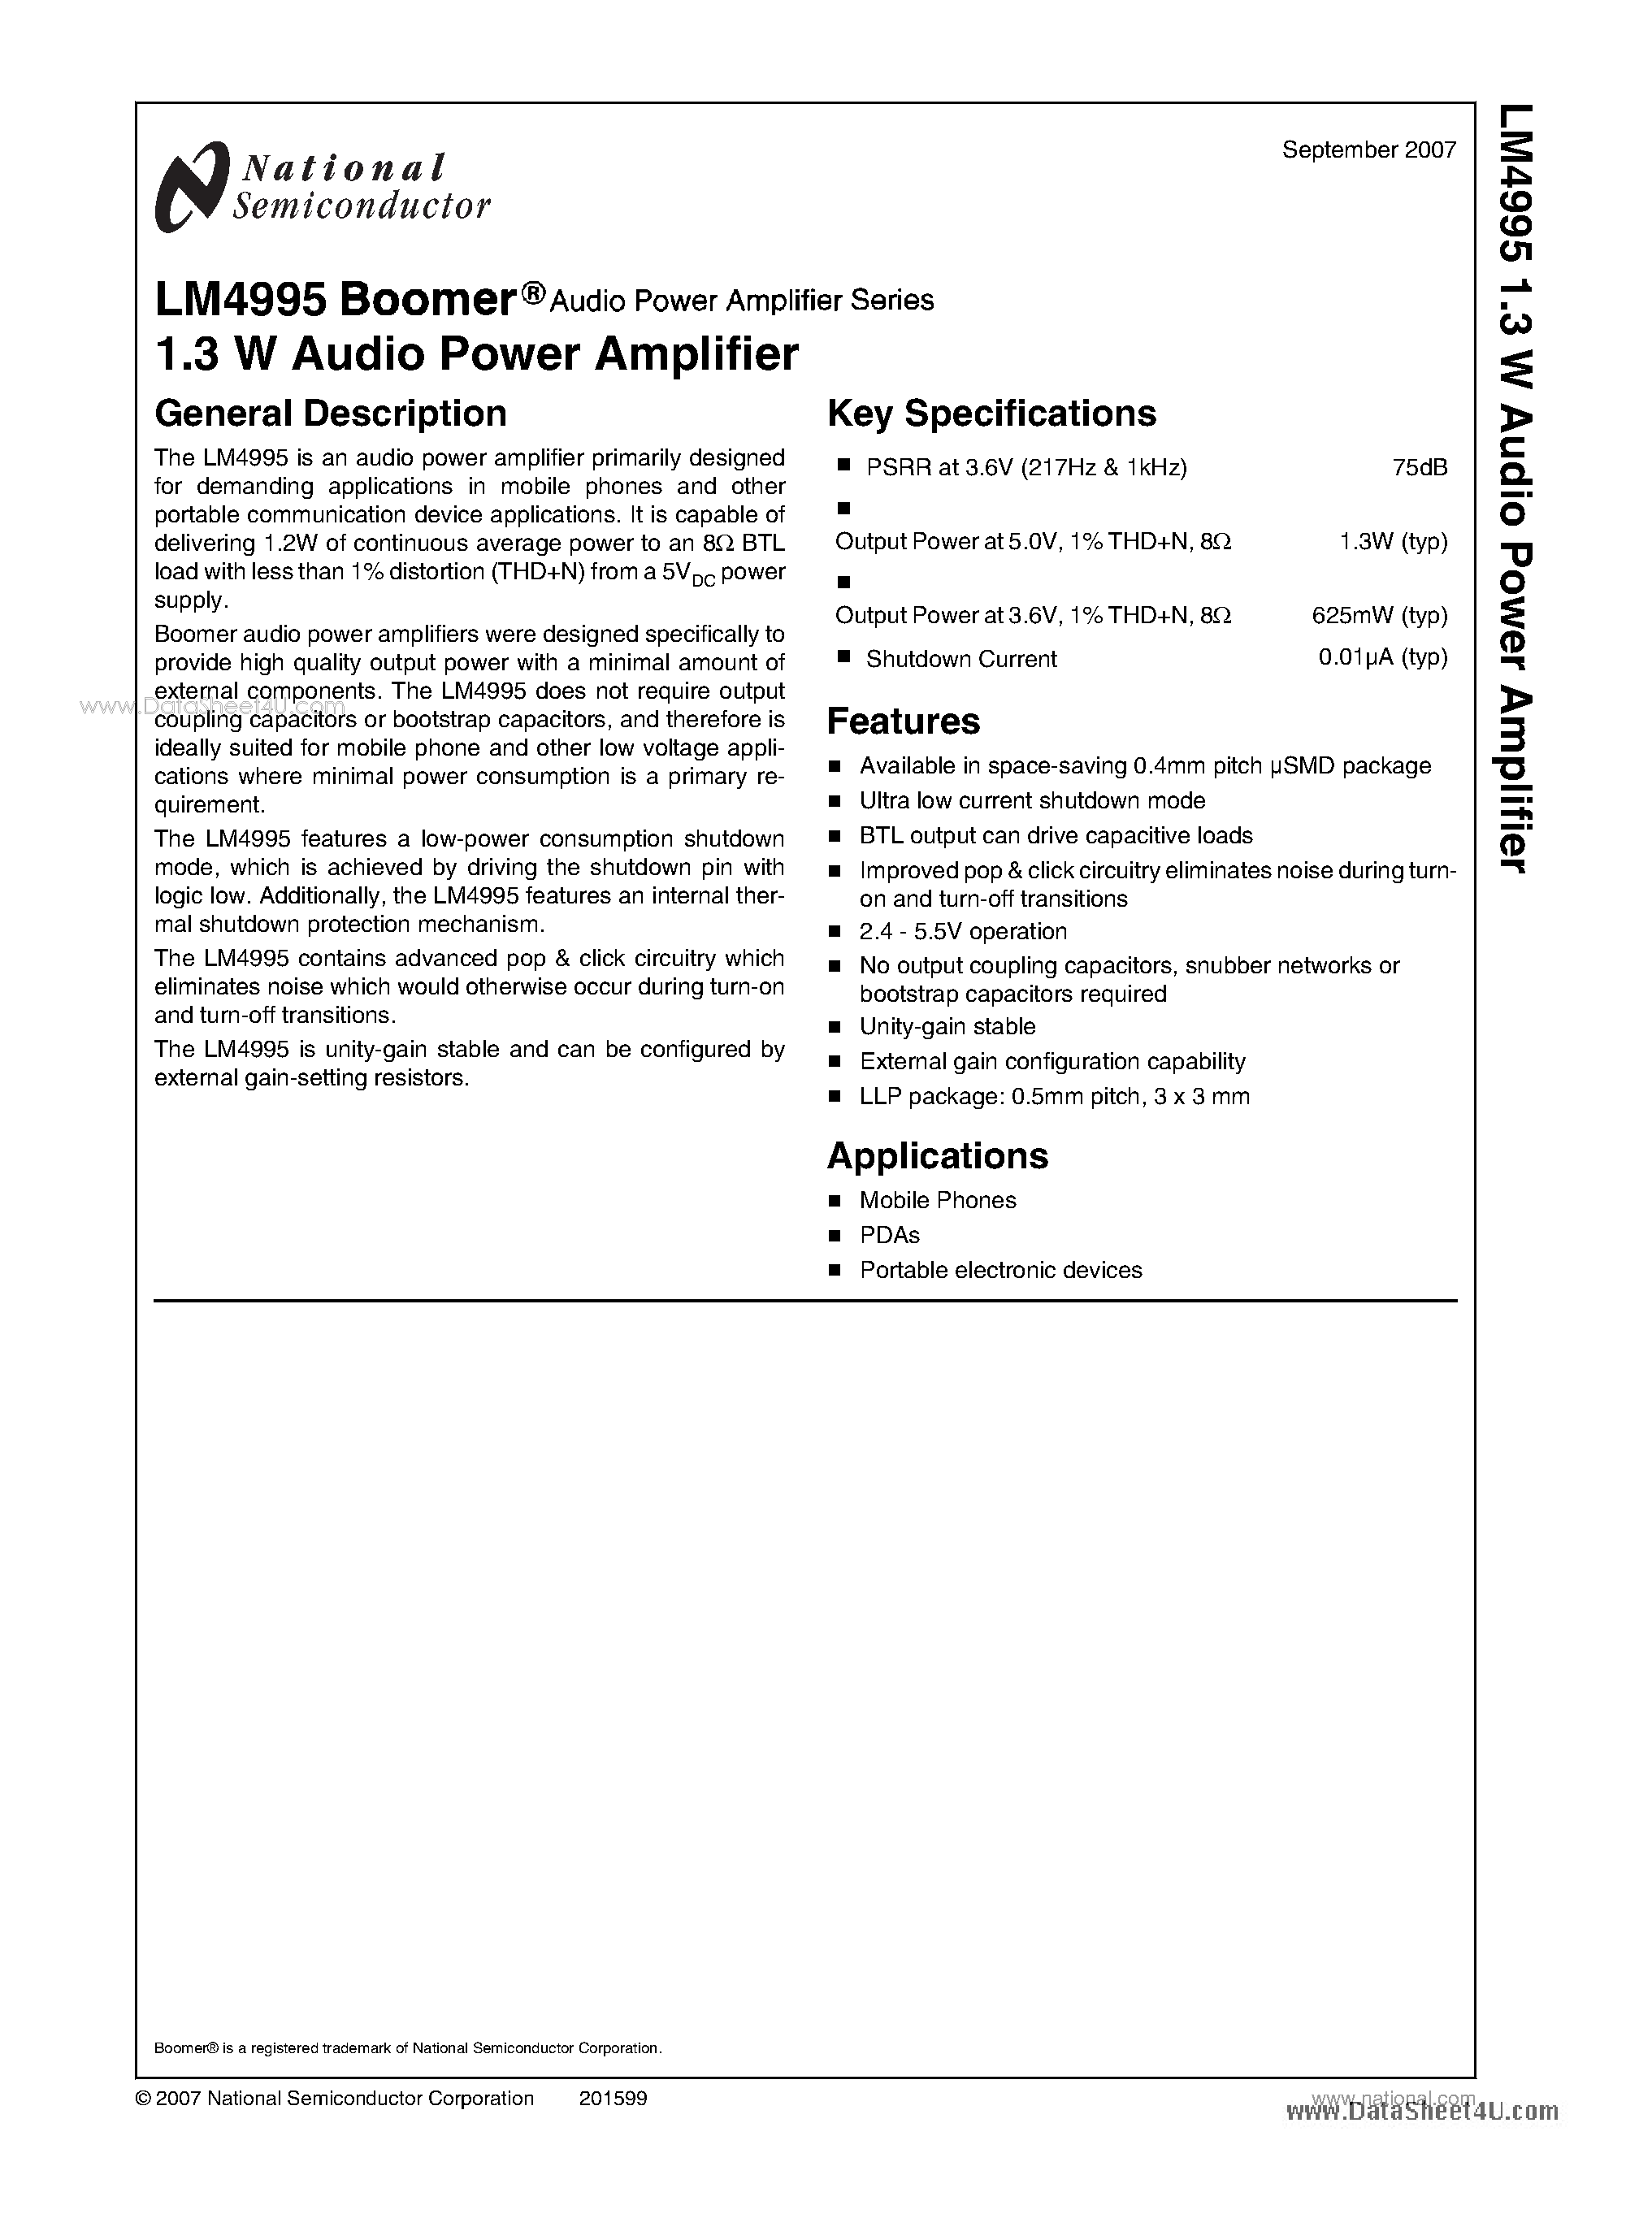 Datasheet LM4995 - 1.3W Audio Power Amplifier page 1